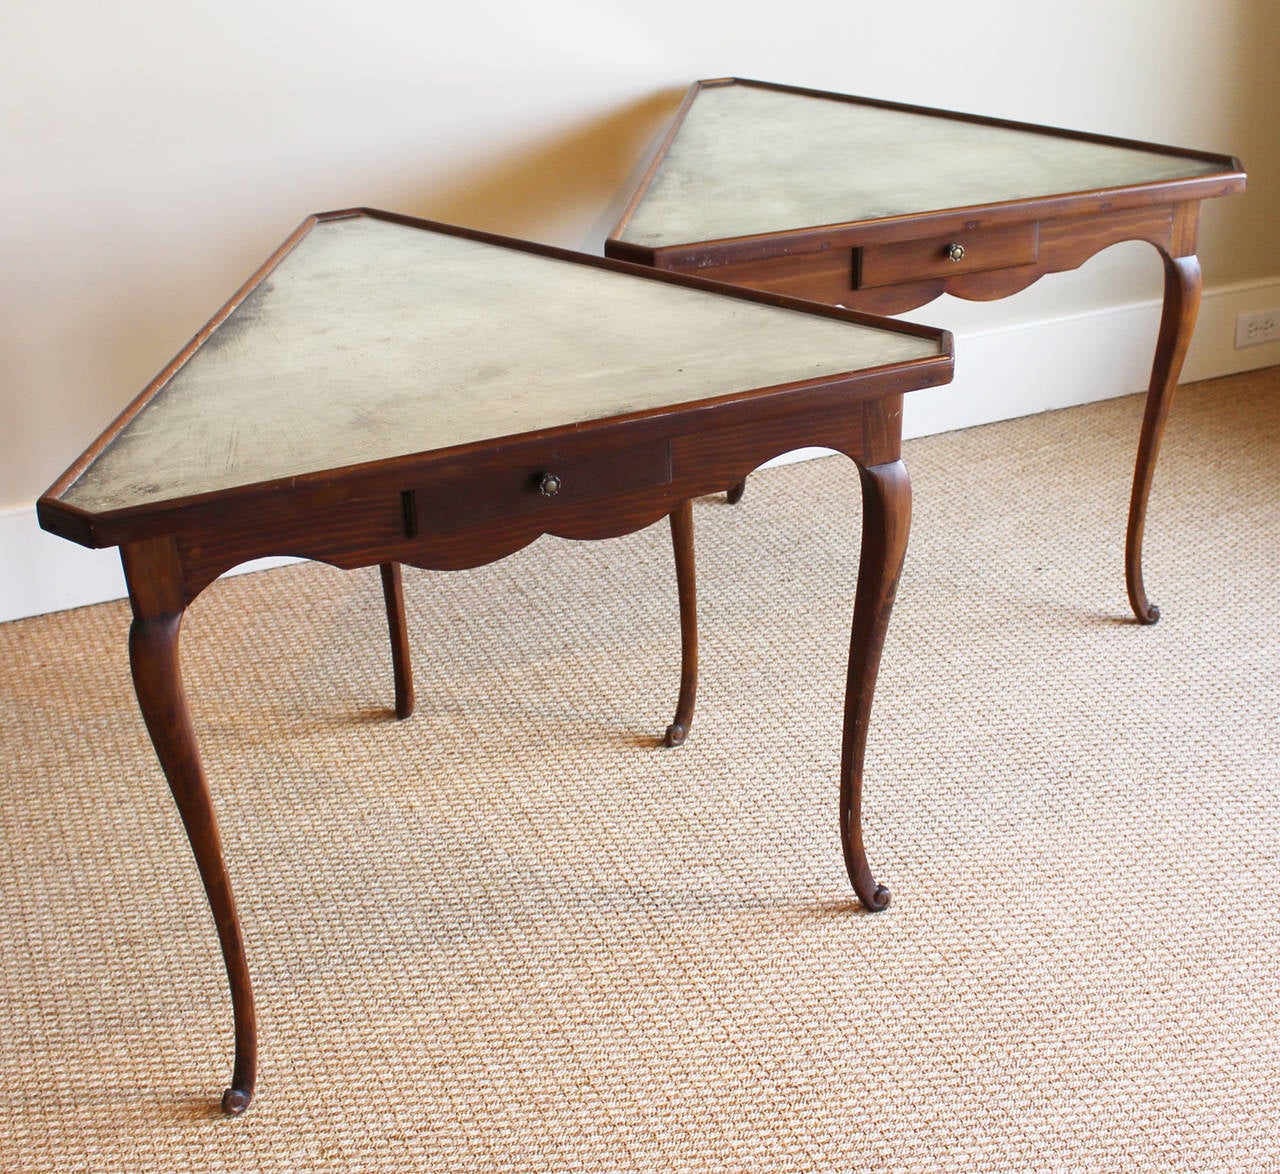 An unusual pair of 1940s Italian triangular-shaped tables with elegantly carved legs and skirts each fitted with a drawer and antiqued mirror tops.